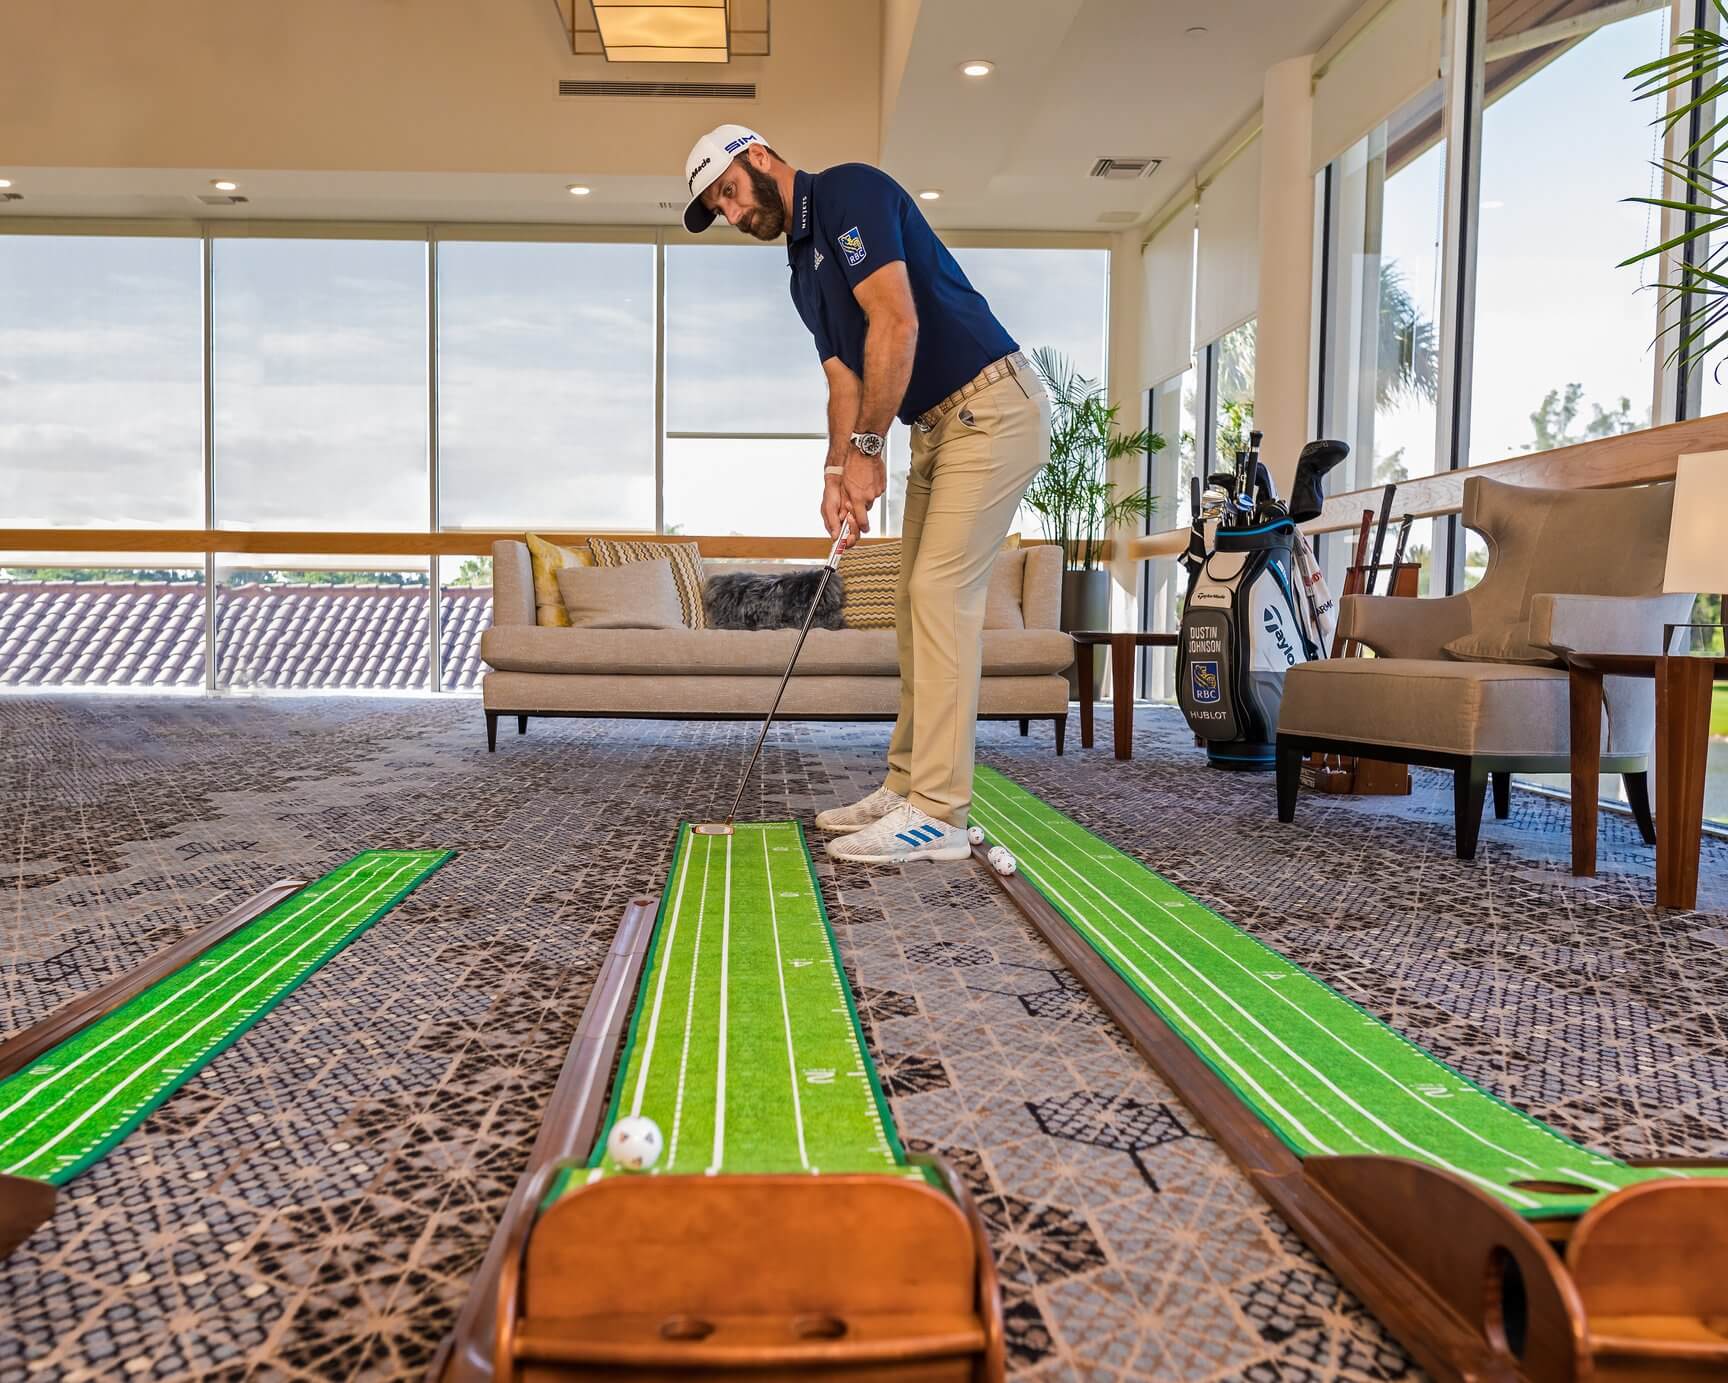 How to Get Better at Golf - Perfect Practice Putting Mat